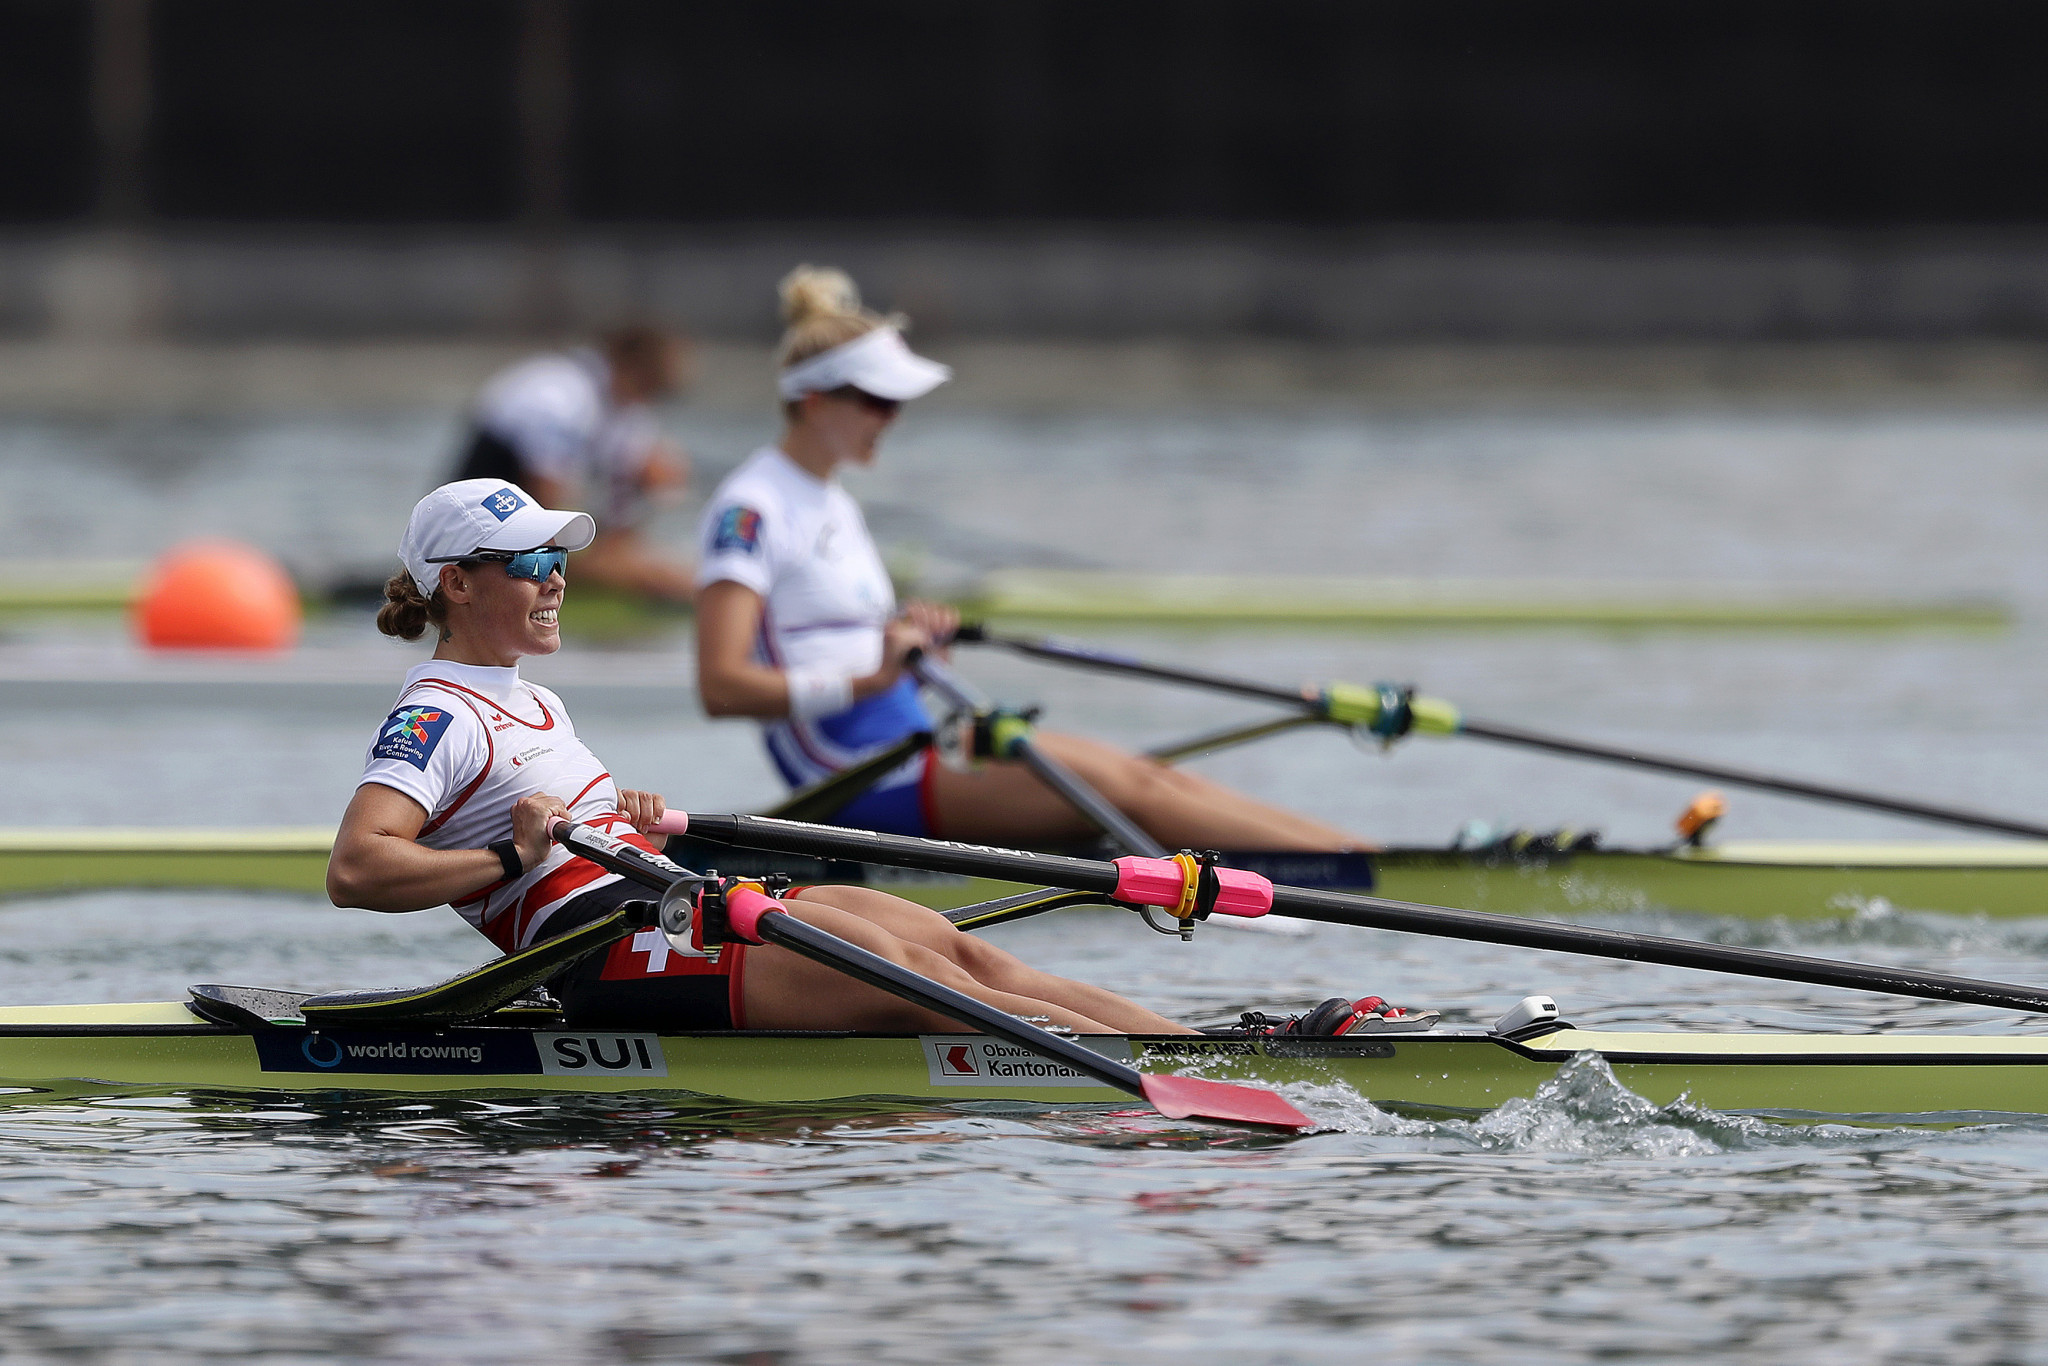 The World Rowing Championships have been cancelled the past two years due to COVID-19 ©Getty Images